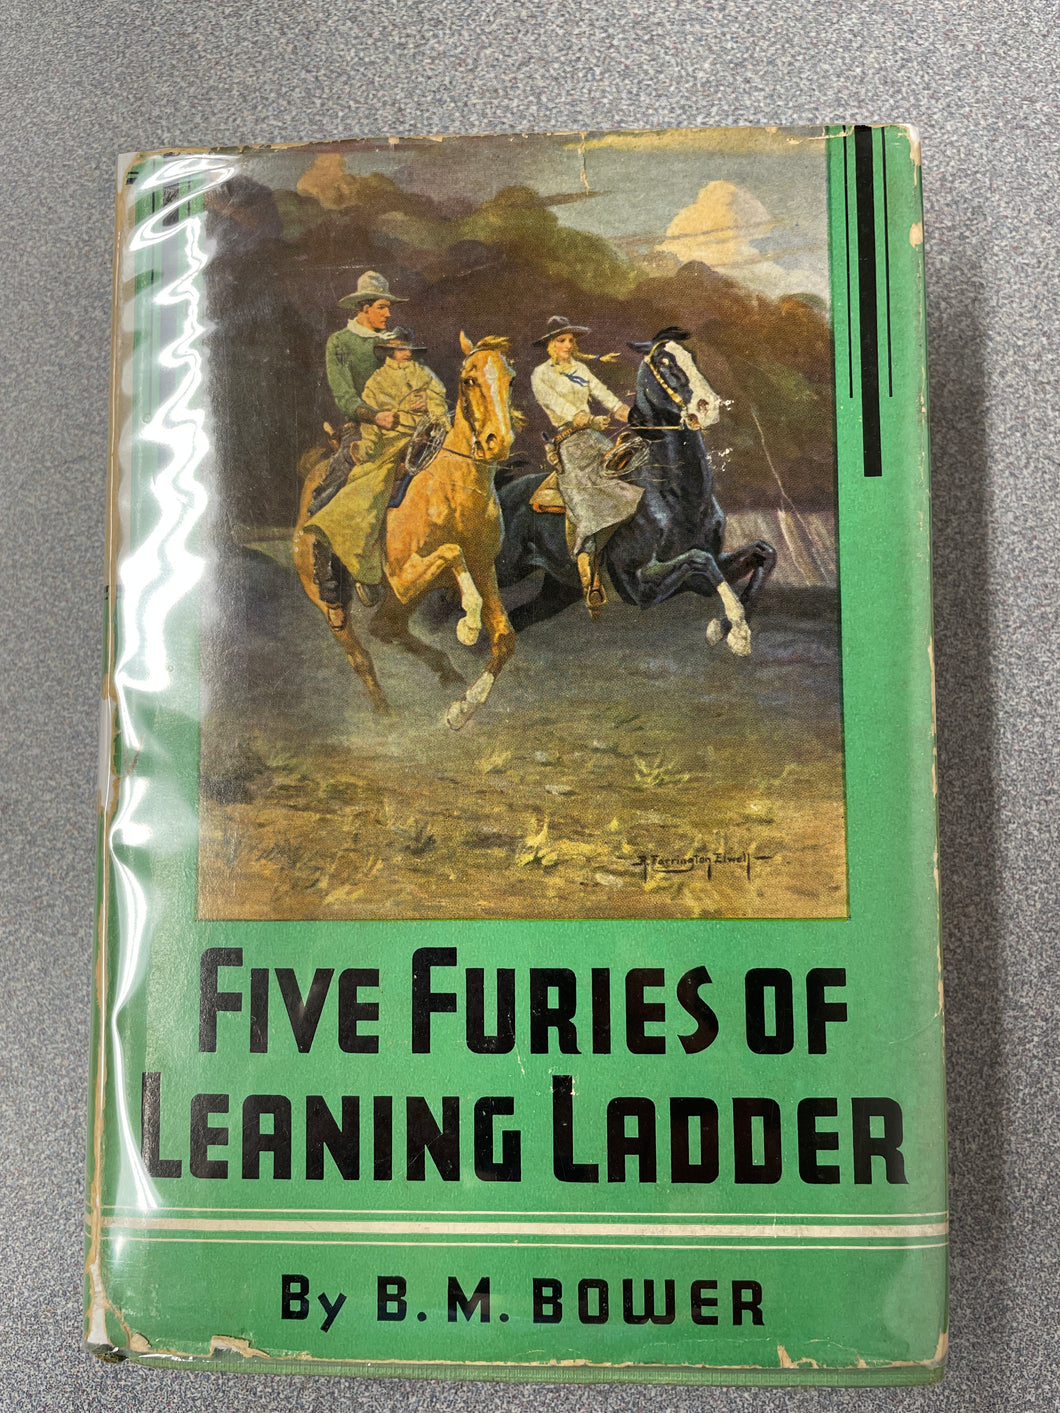 Bower, B. M. Five Furies of Leaning Ladder [1936] CC 11/23